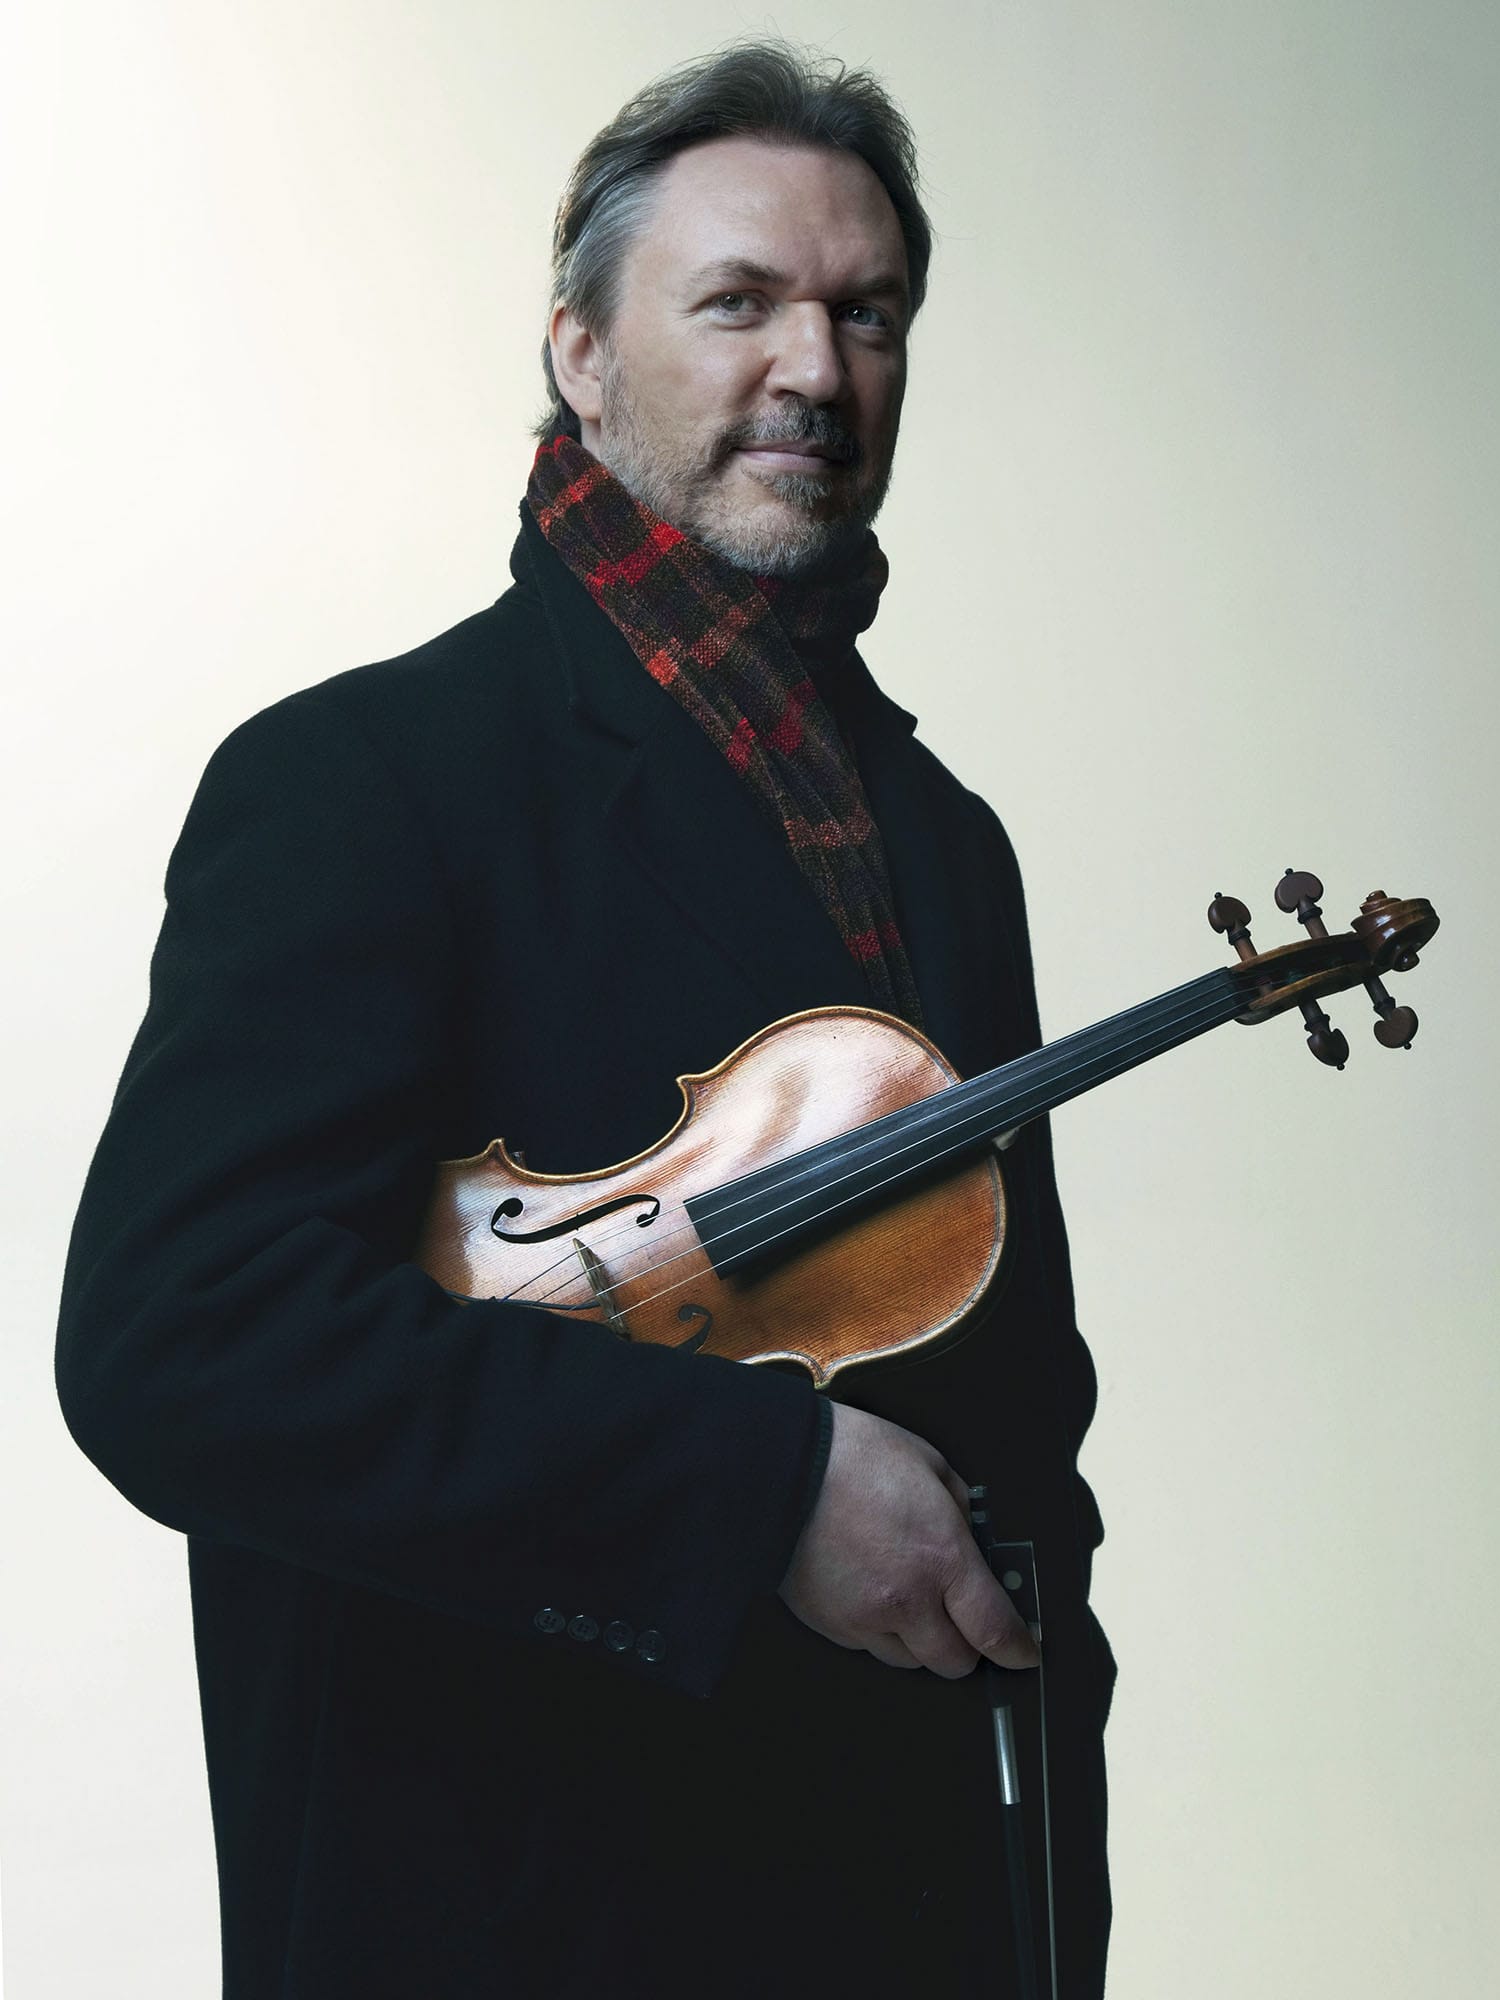 Grammy-winning violinist Mark O'Connor will perform his &quot;An Appalachian Christmas&quot; Dec. 23, 2014 at Arlene Schnitzer Concert Hall in Portland.